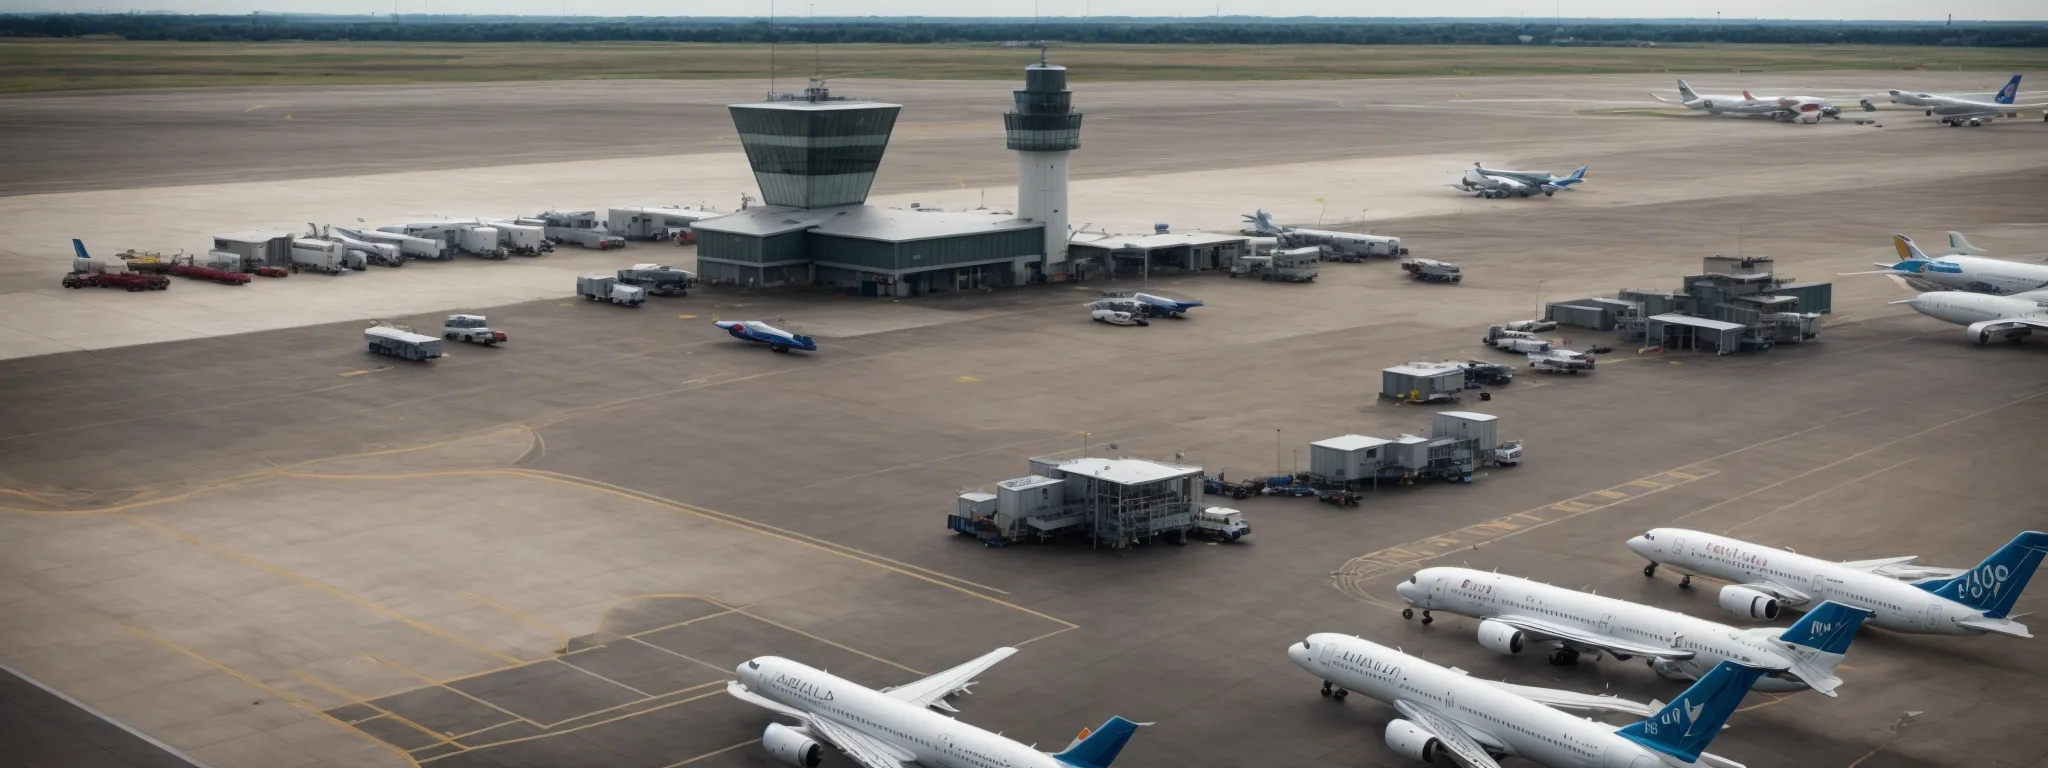 a control tower overlooking a busy airport runway with multiple airplanes preparing for takeoff.